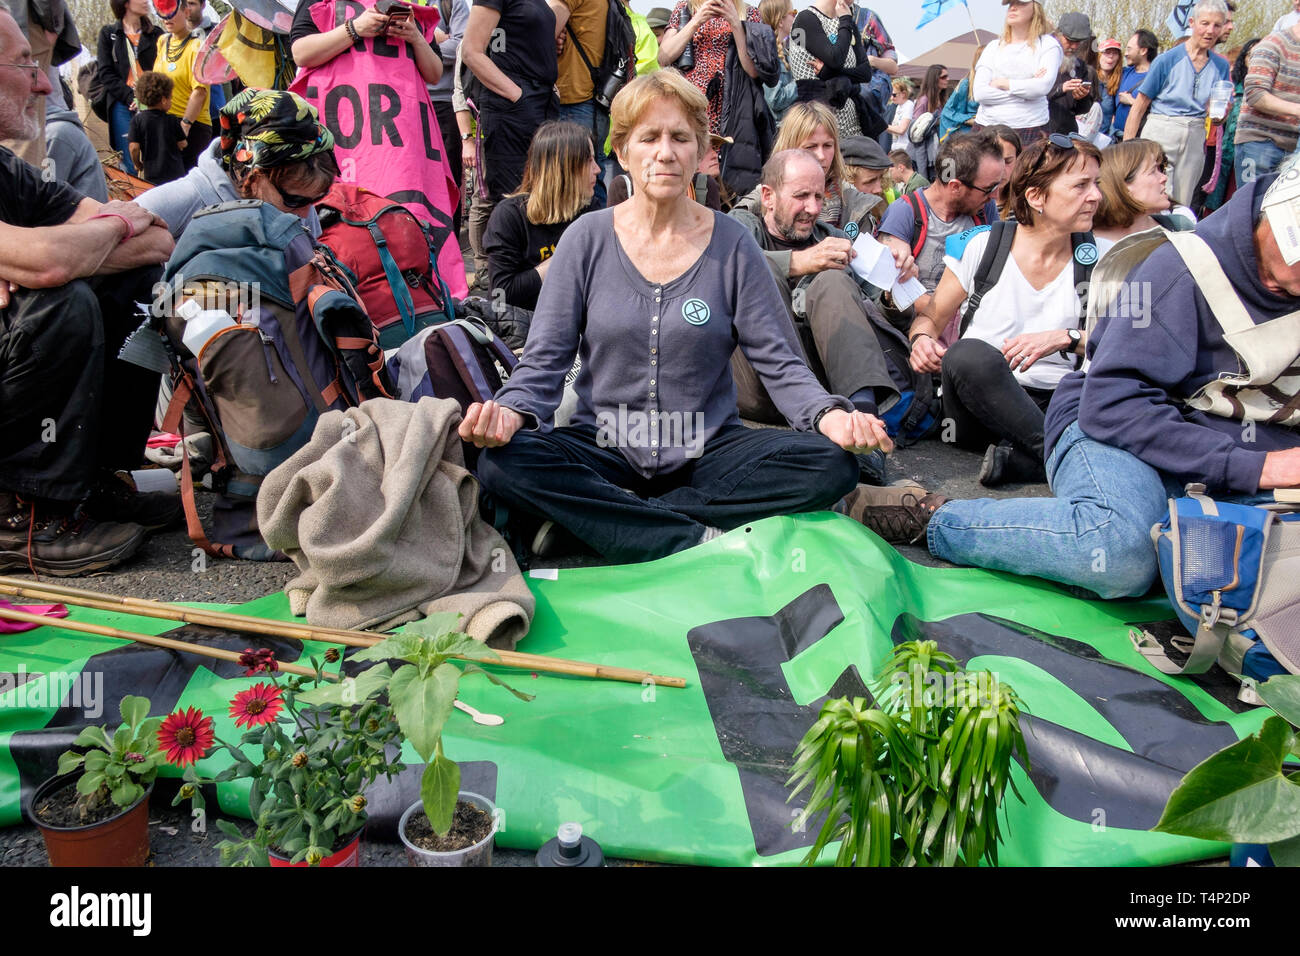 Extinction Rebellion activists occupying Waterloo Bridge in April 2019: A mature female protester meditates before police begin making arrests. Stock Photo